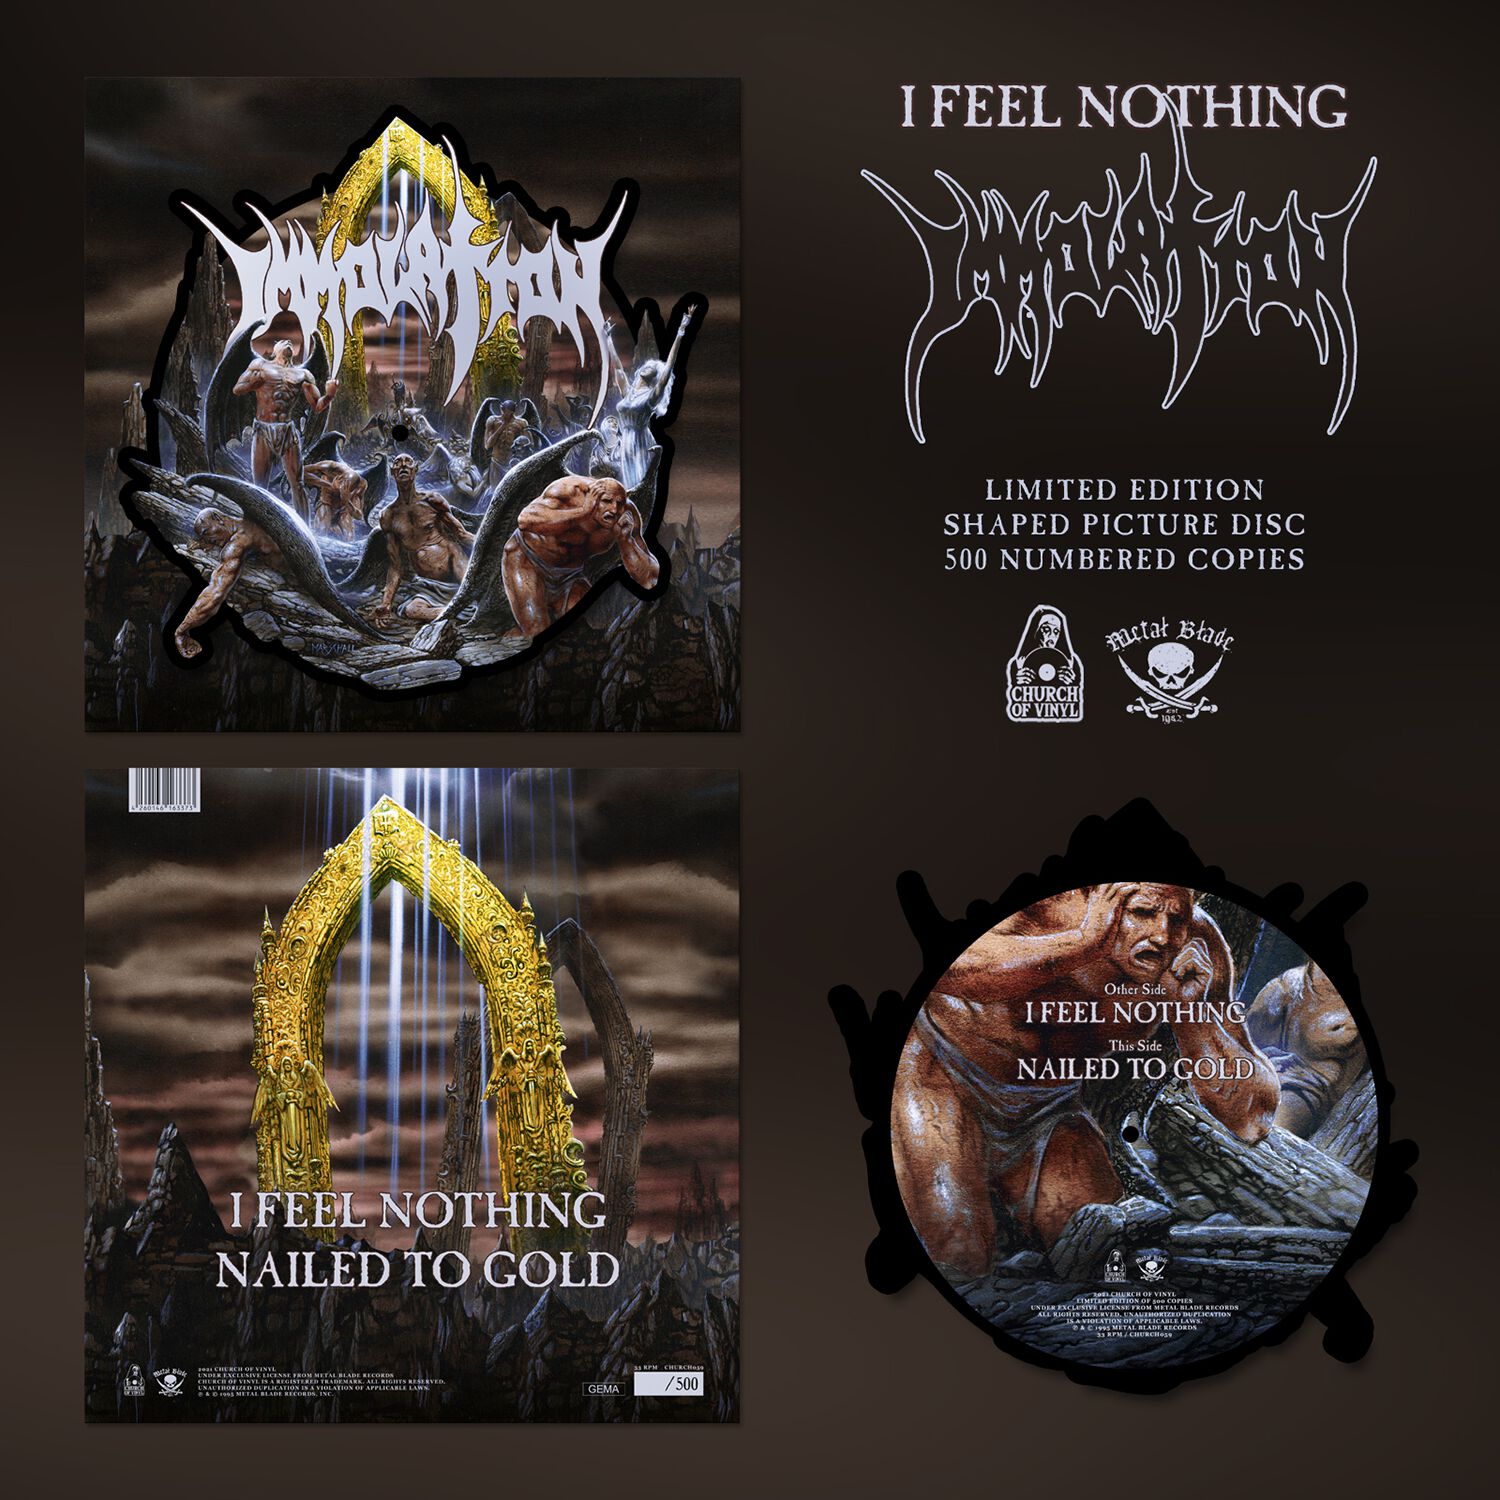 Immolation I feel nothing LP coloured